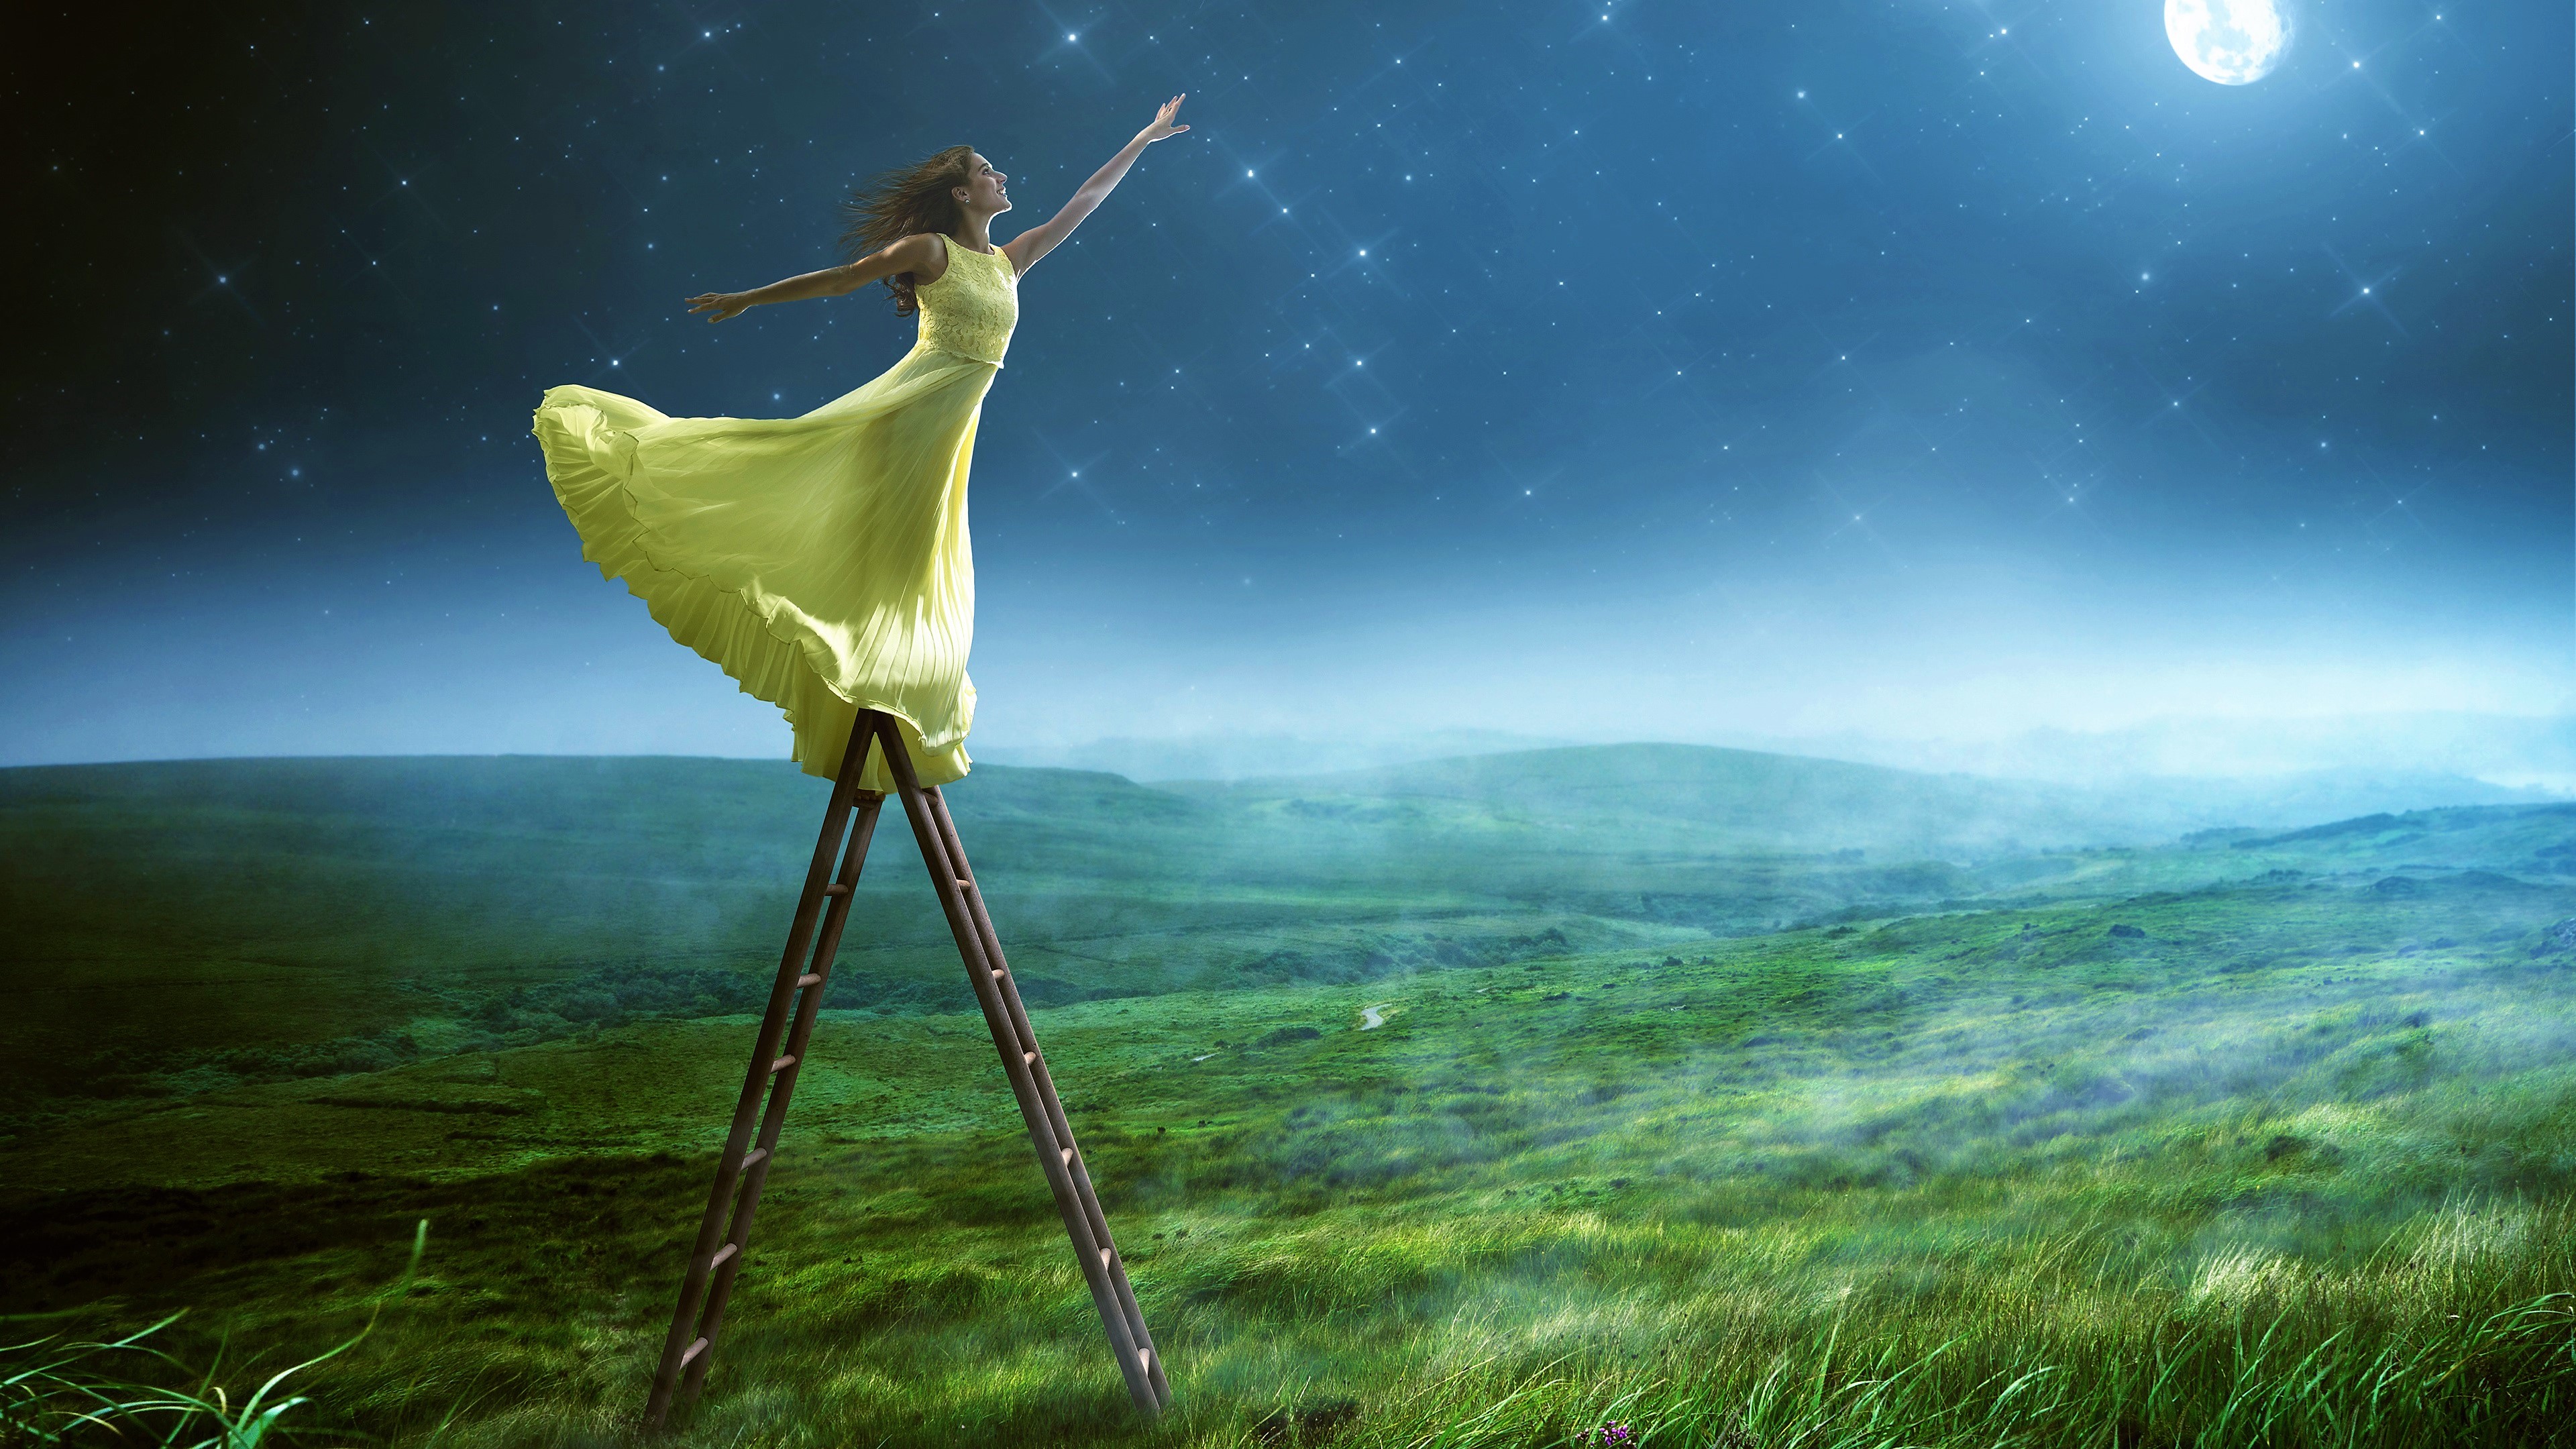 android grass, artistic, fantasy, dress, ladder, moon